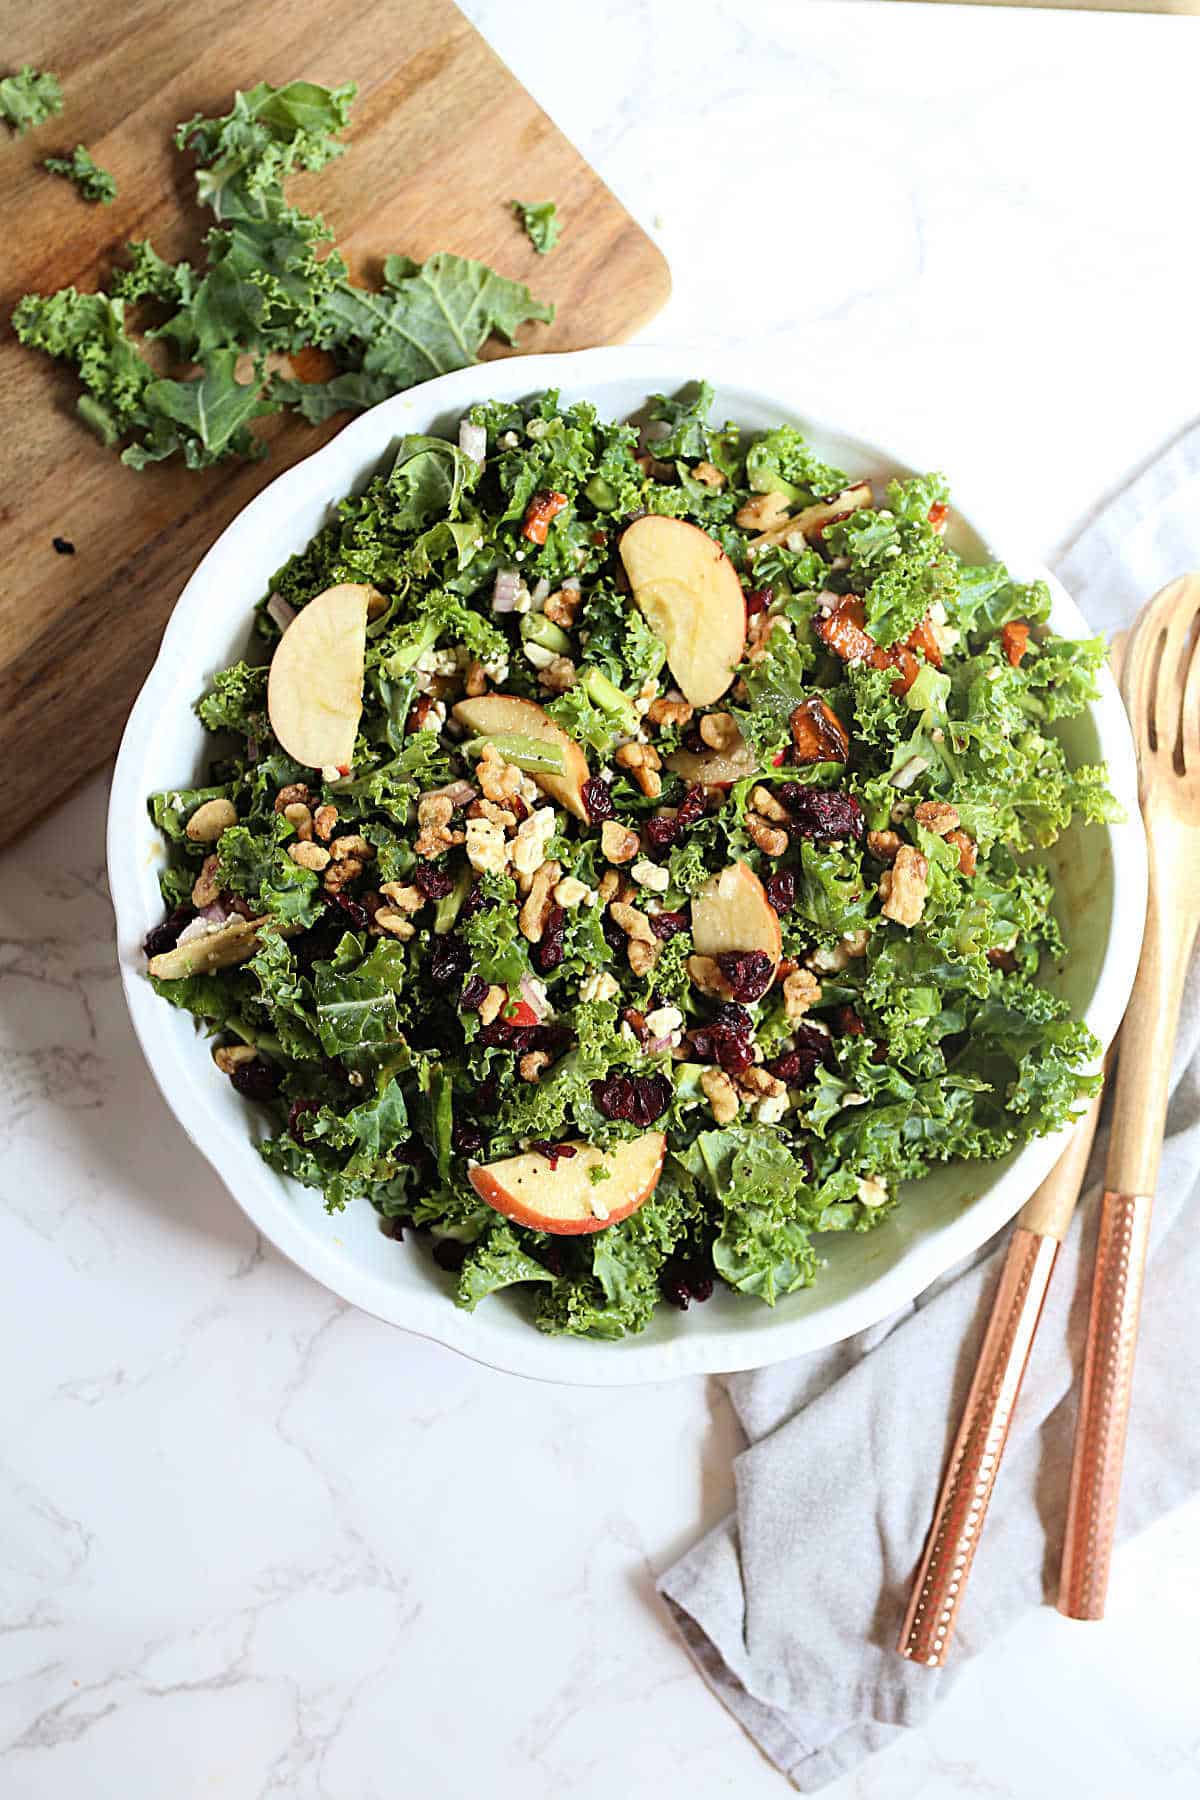 Apple and blue cheese kale salad with walnuts and honey mustard dressing.